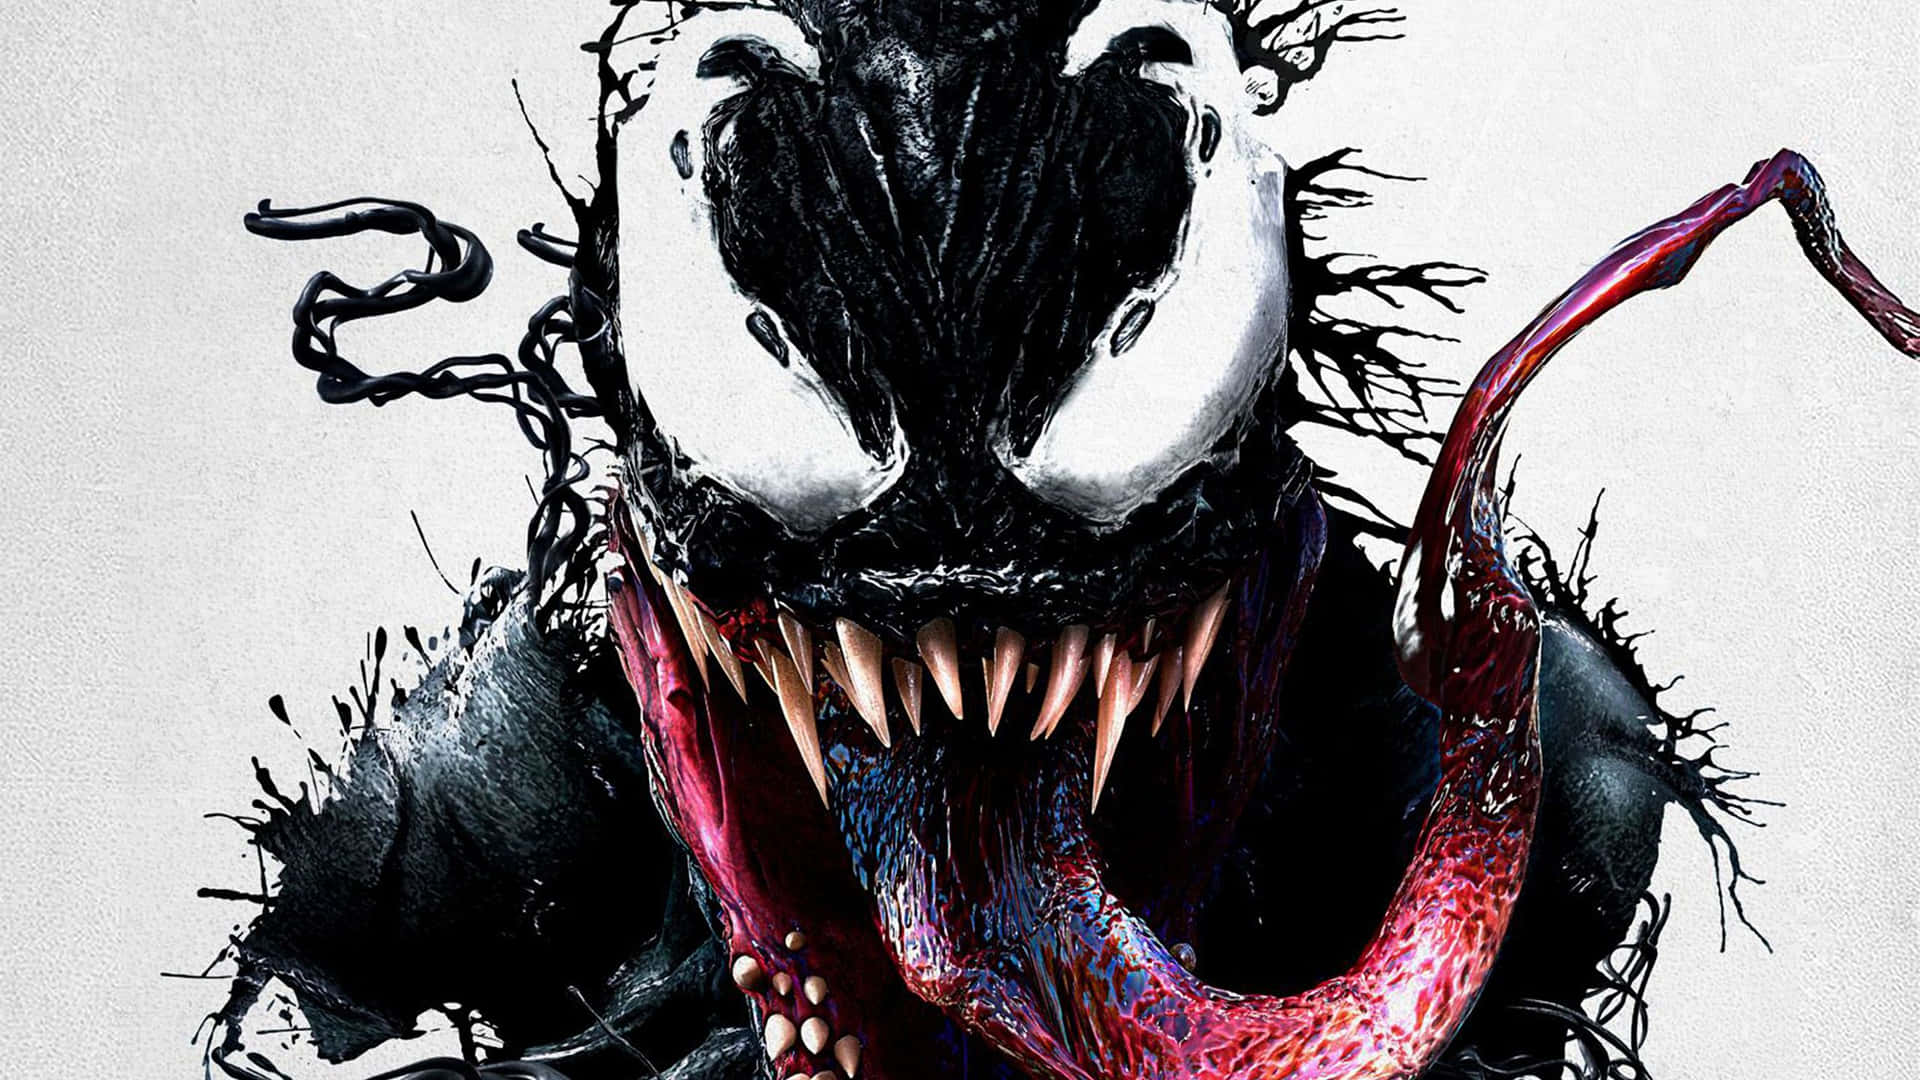 Image  Magnified abstract details of Venom character Wallpaper